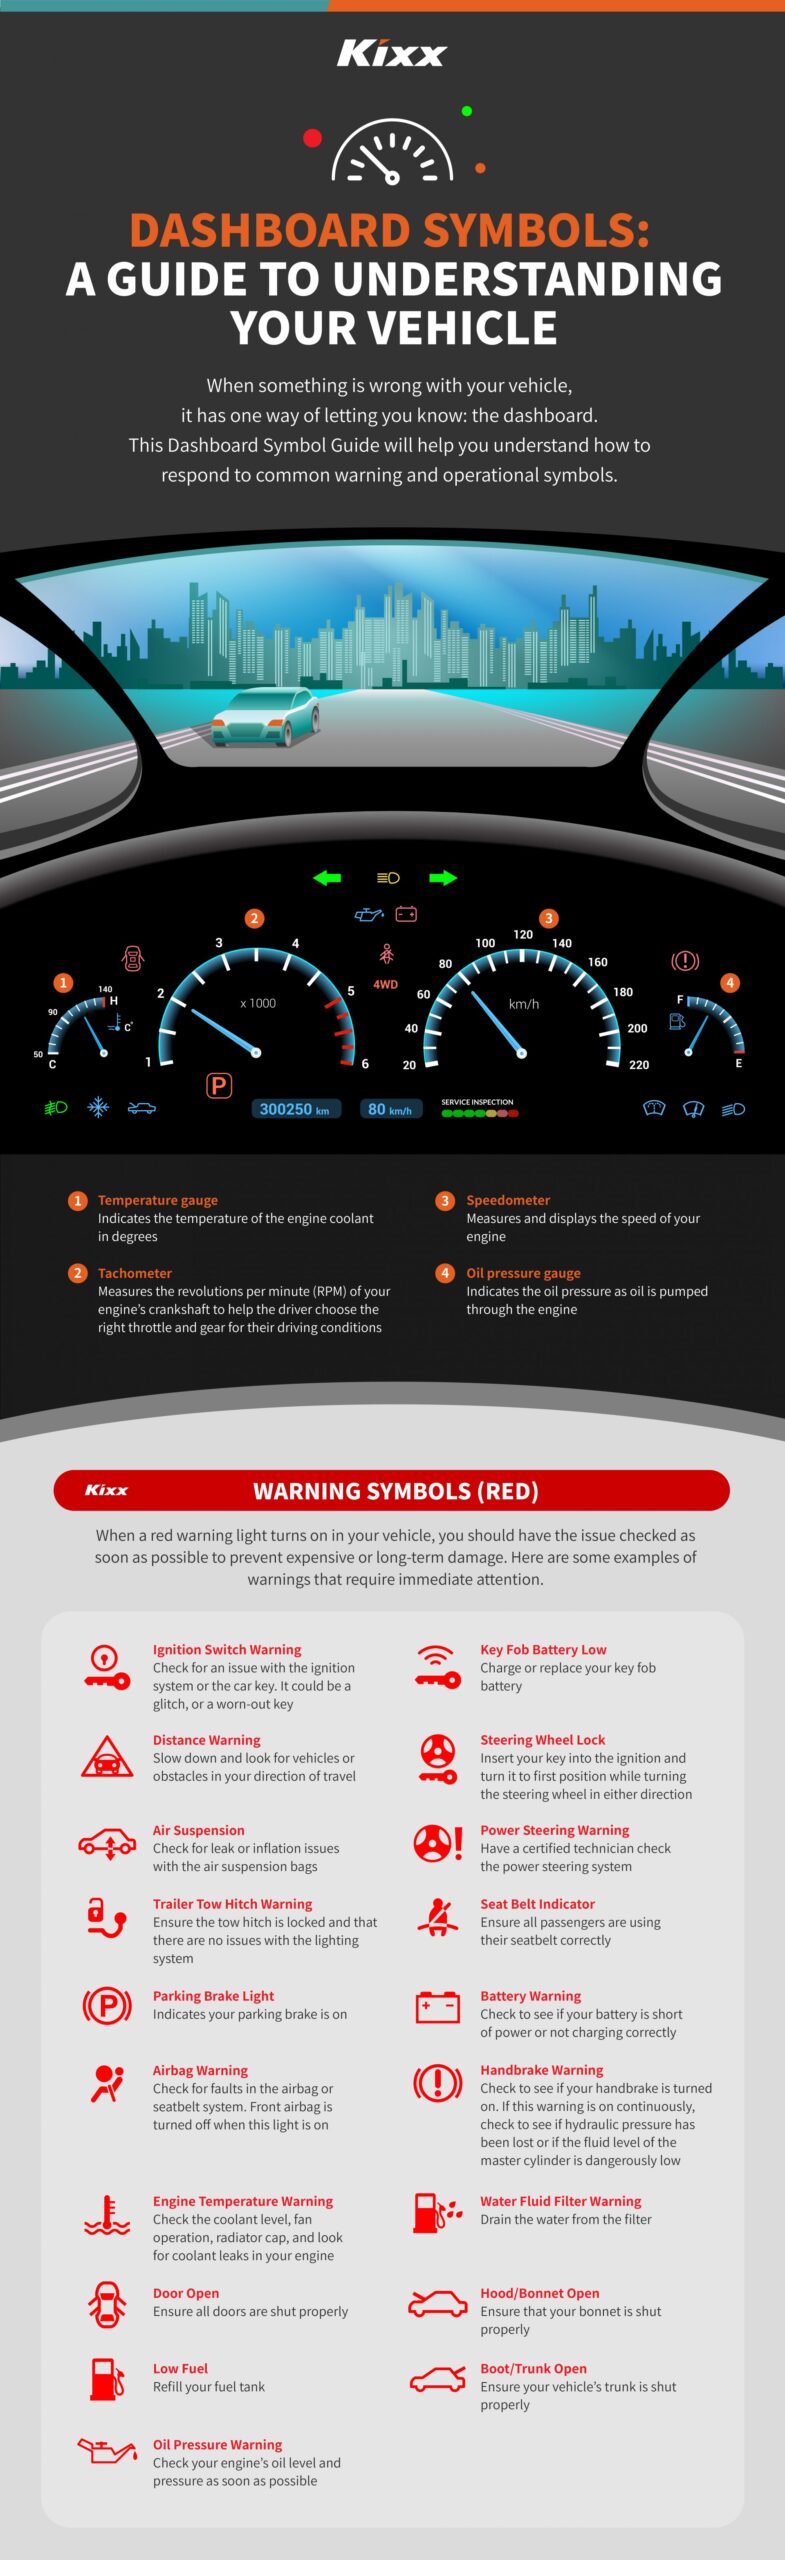 Understanding What Your Dashboard is Saying